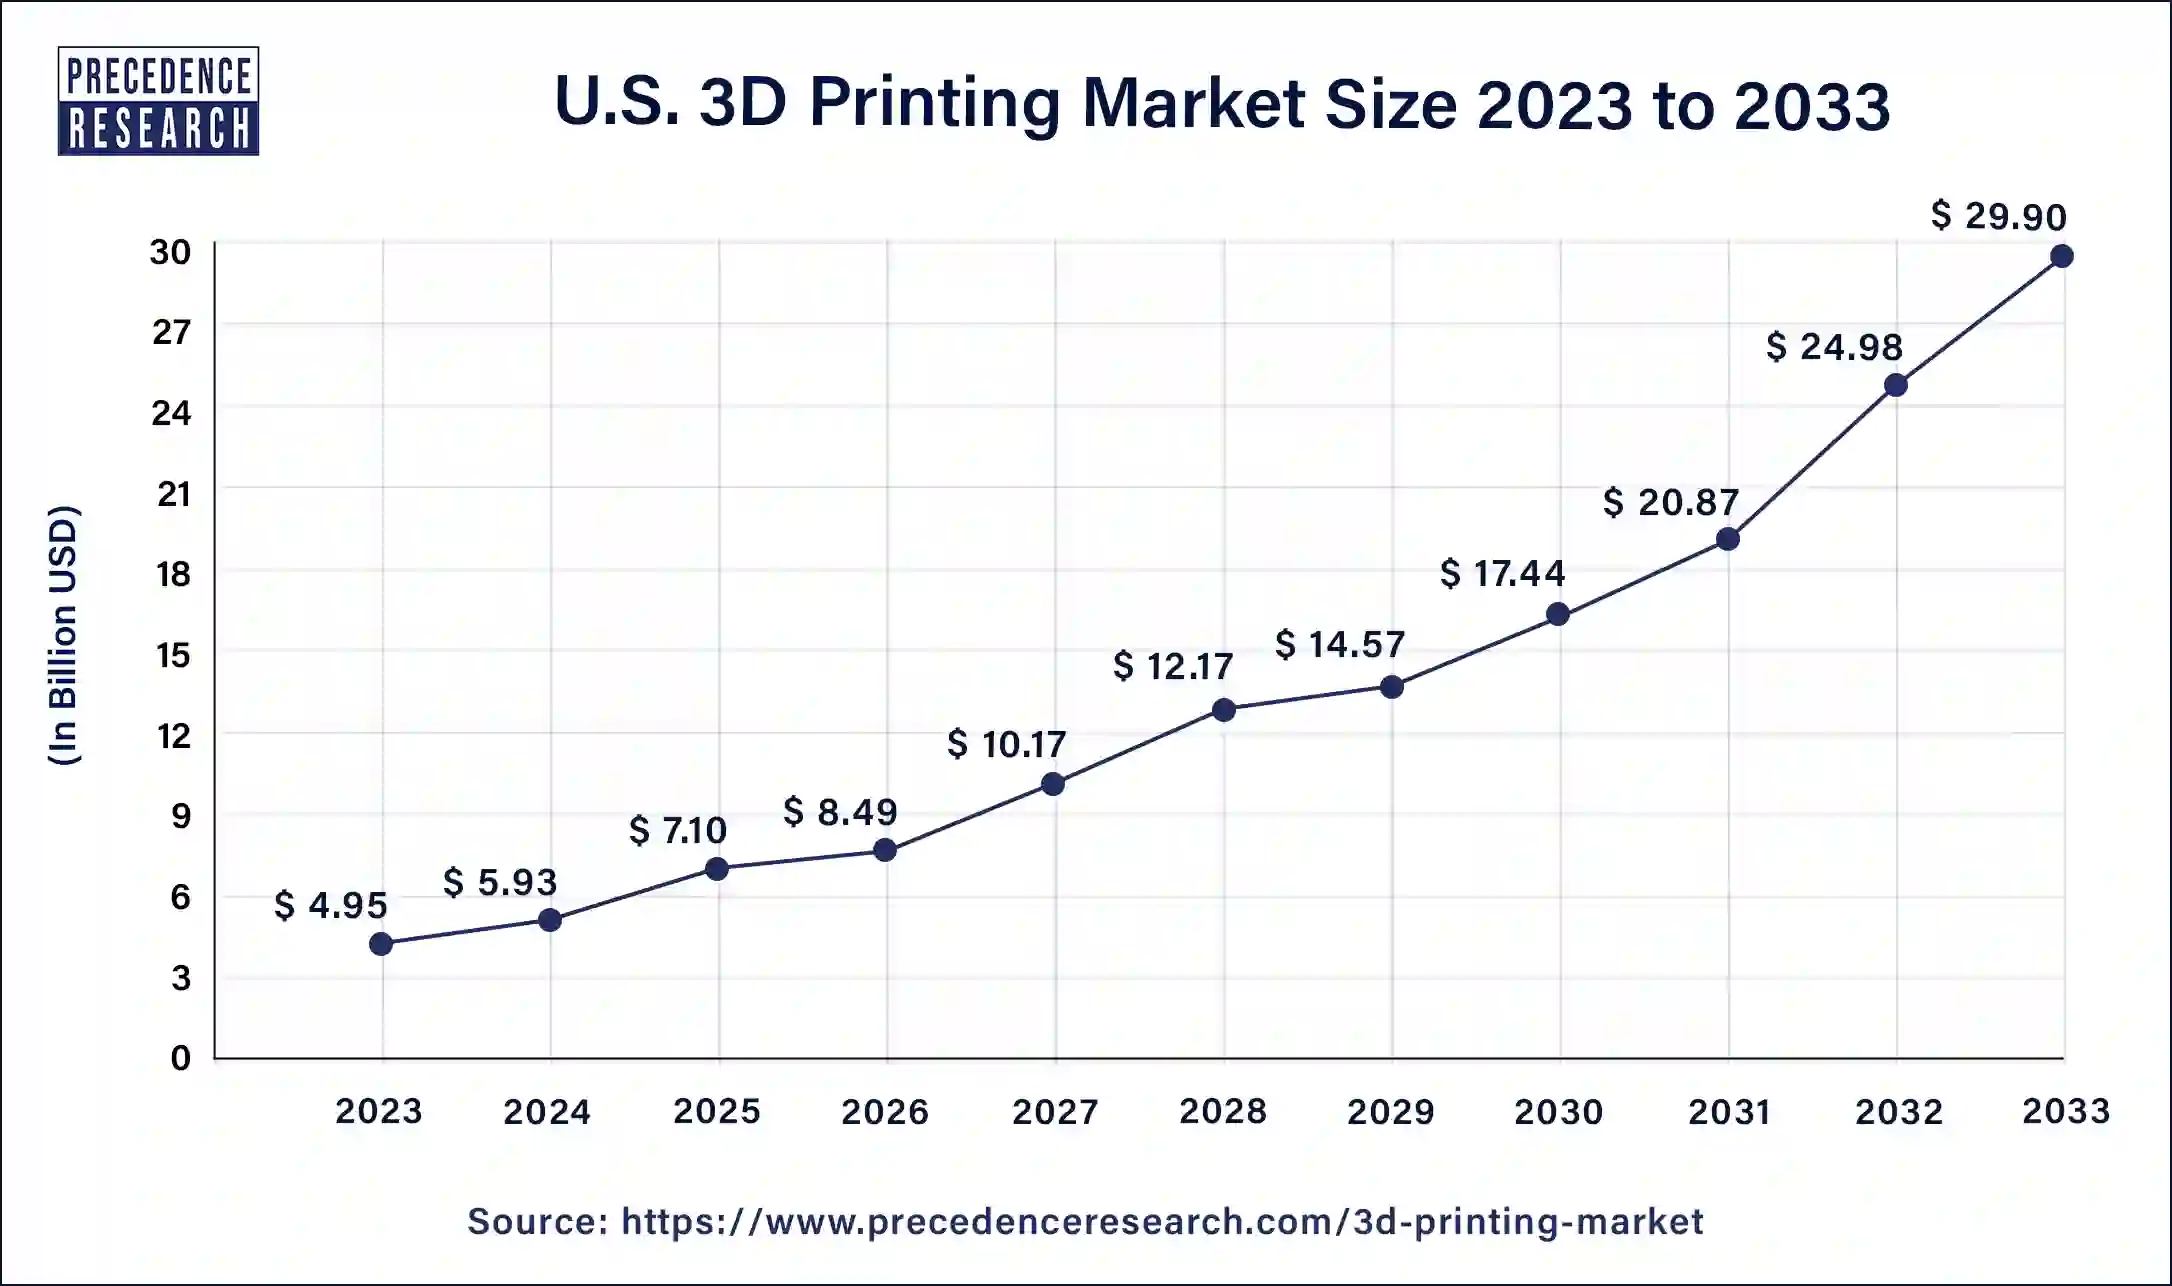 U.S. 3D Printing Market Size 2024 to 2033